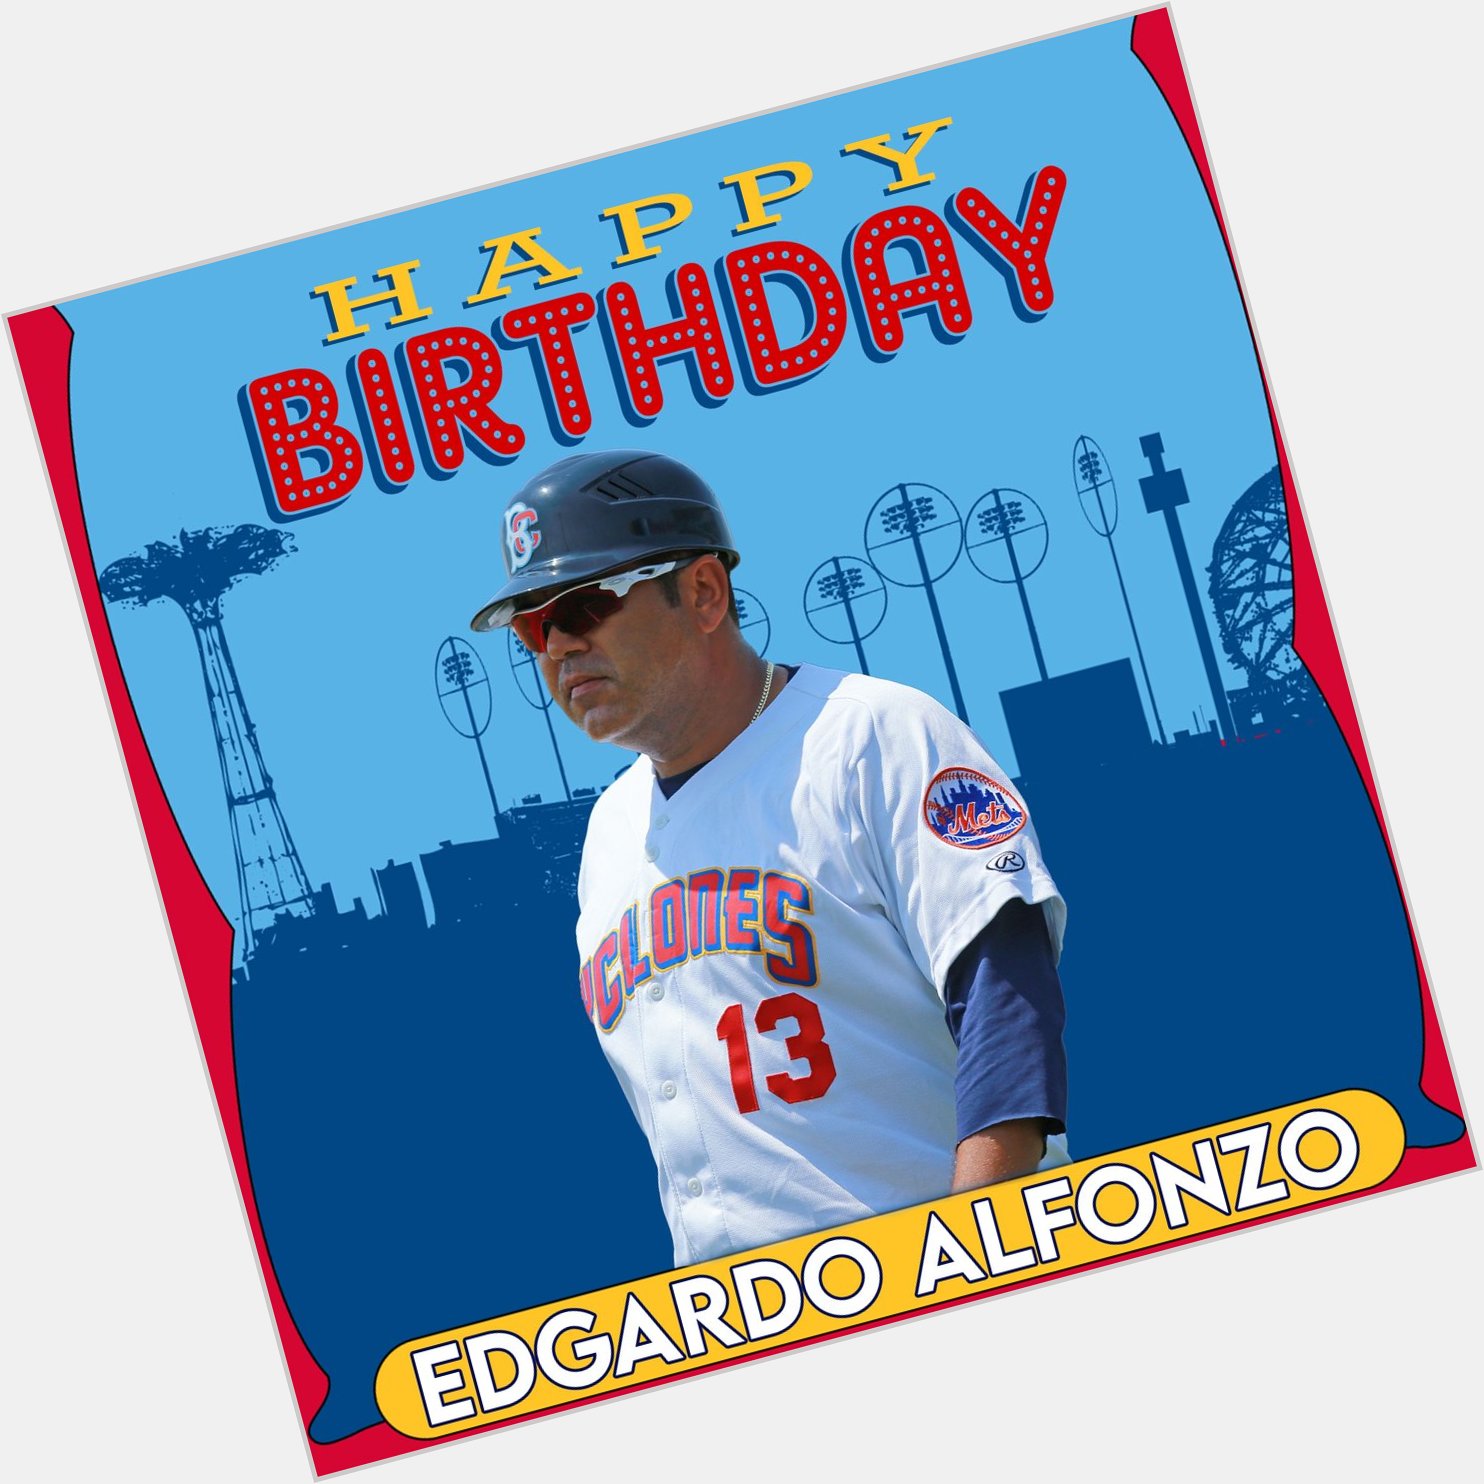 Happy Birthday to Mets legend and Cyclones Championship Manager Edgardo Alfonzo! 